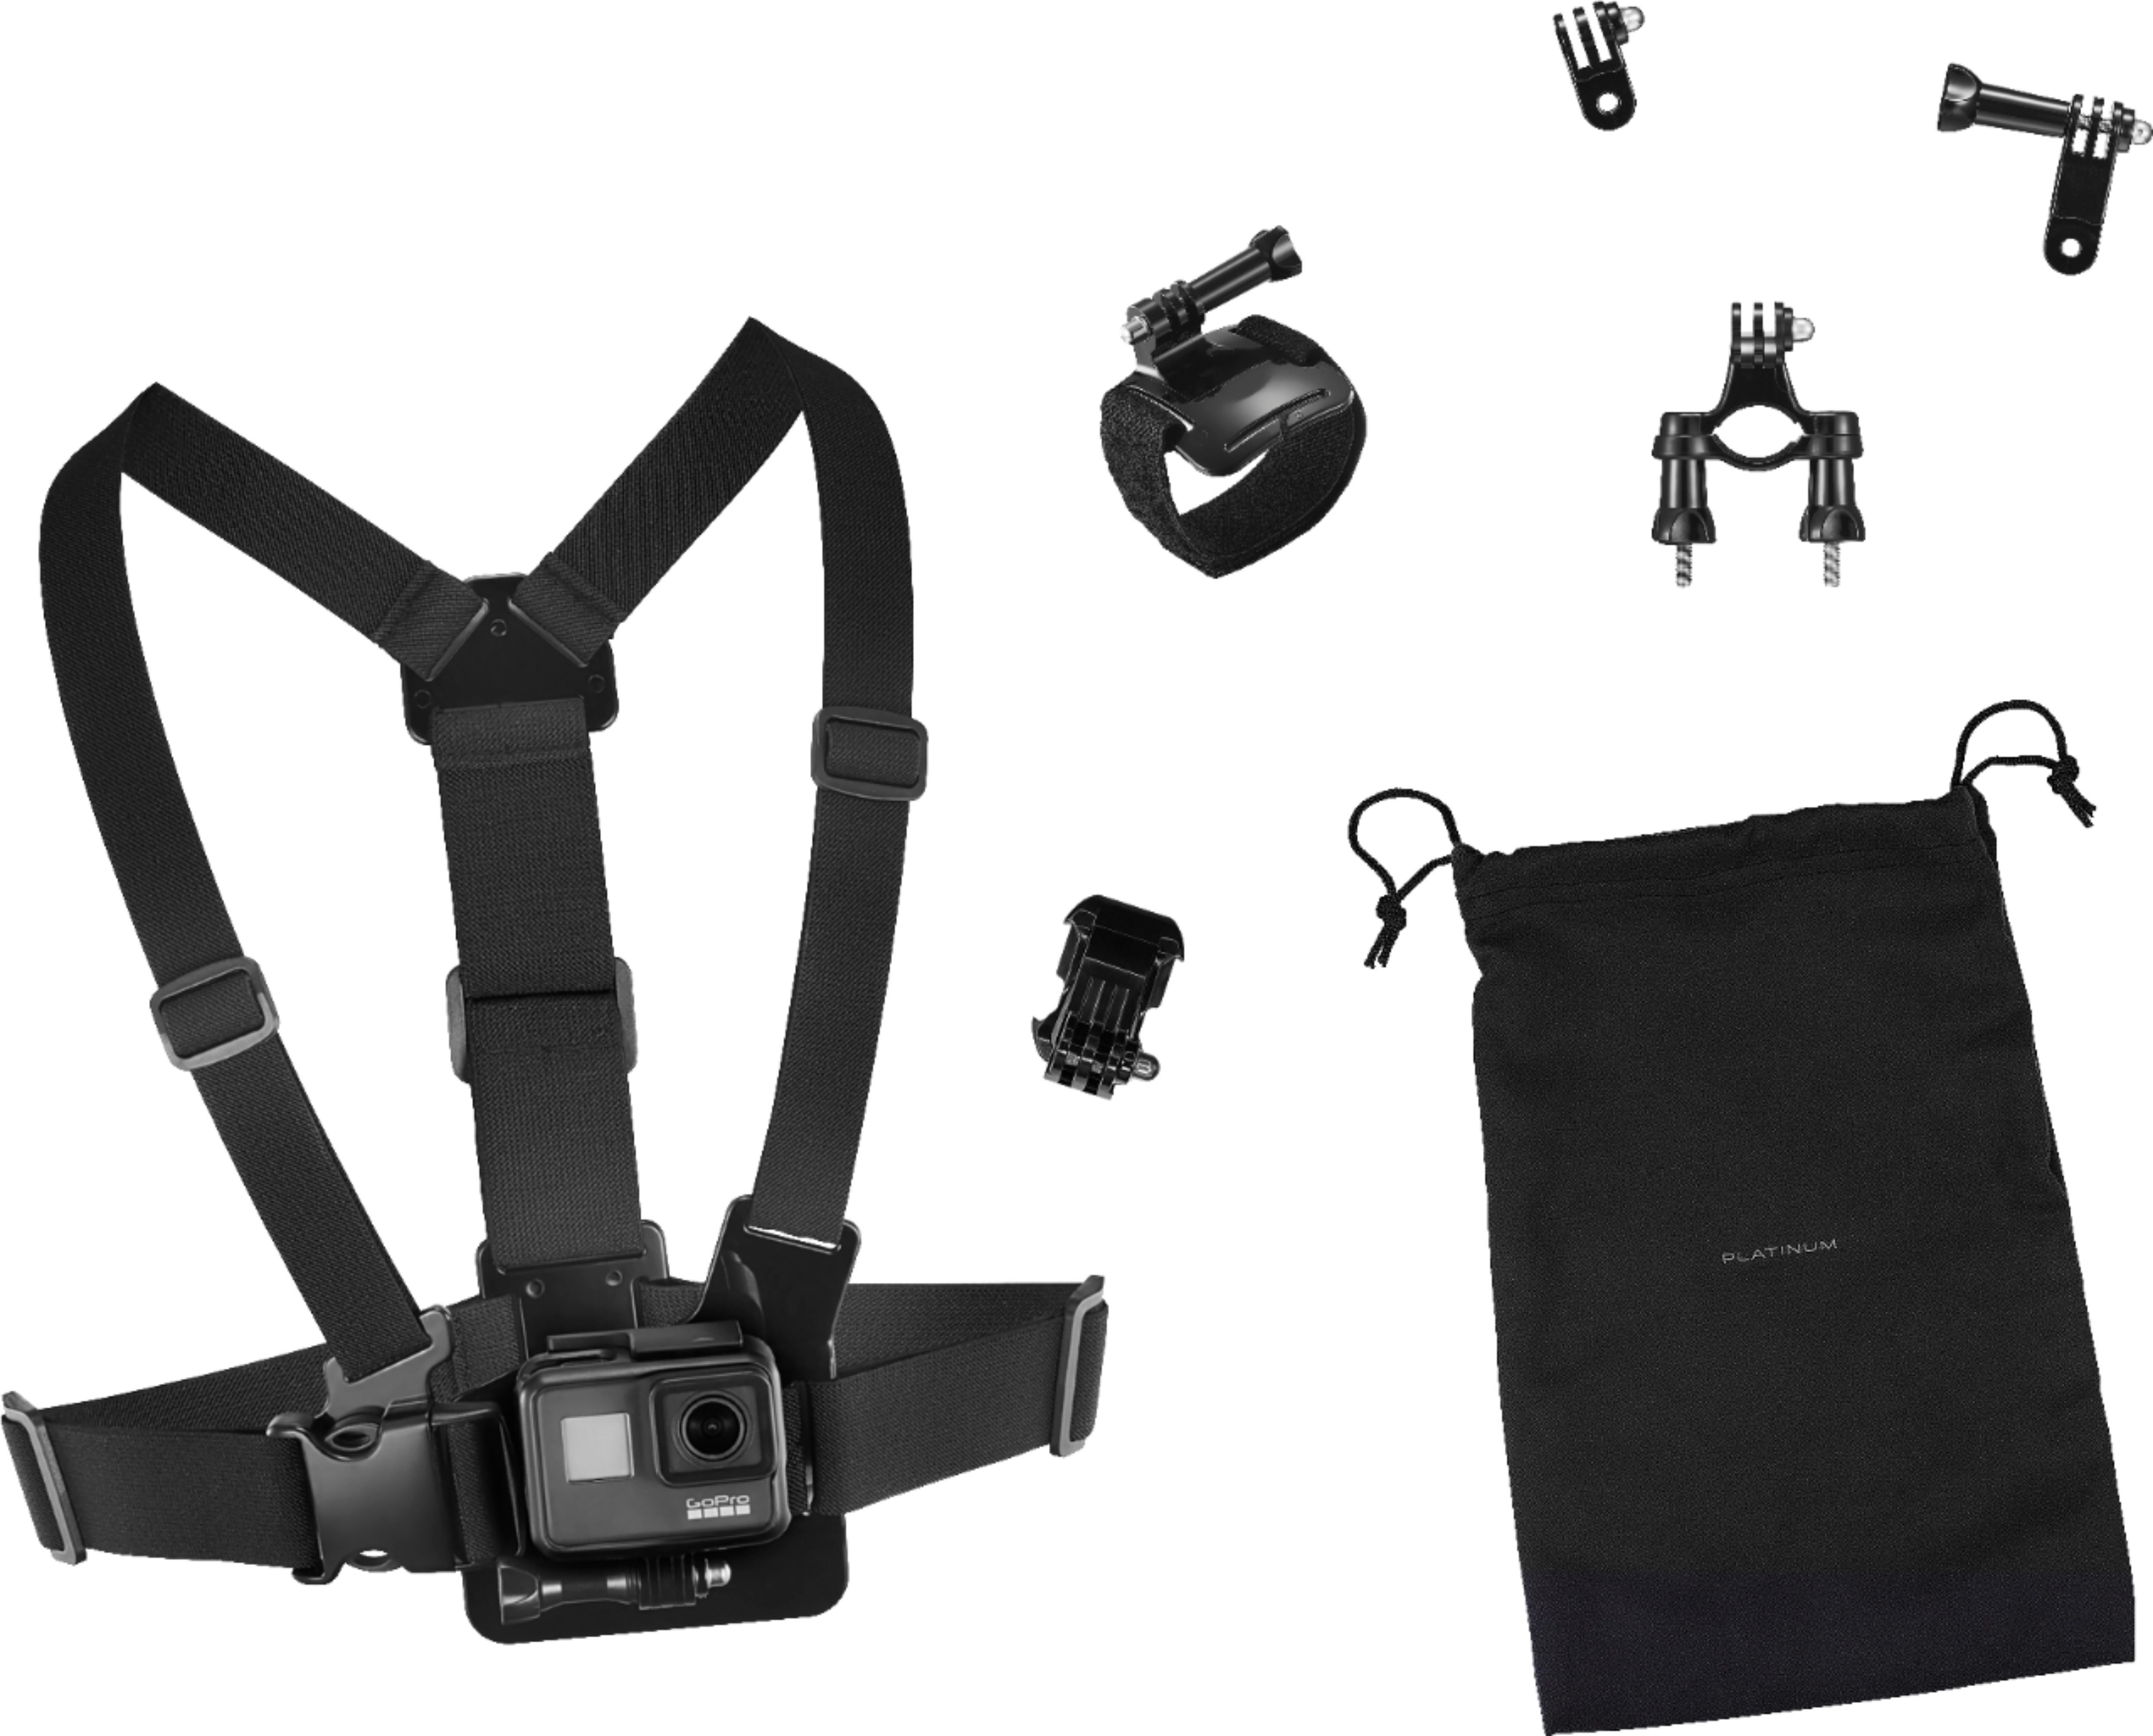 Angle View: Platinum™ - Extreme Accessory Kit for GoPro Action Cameras